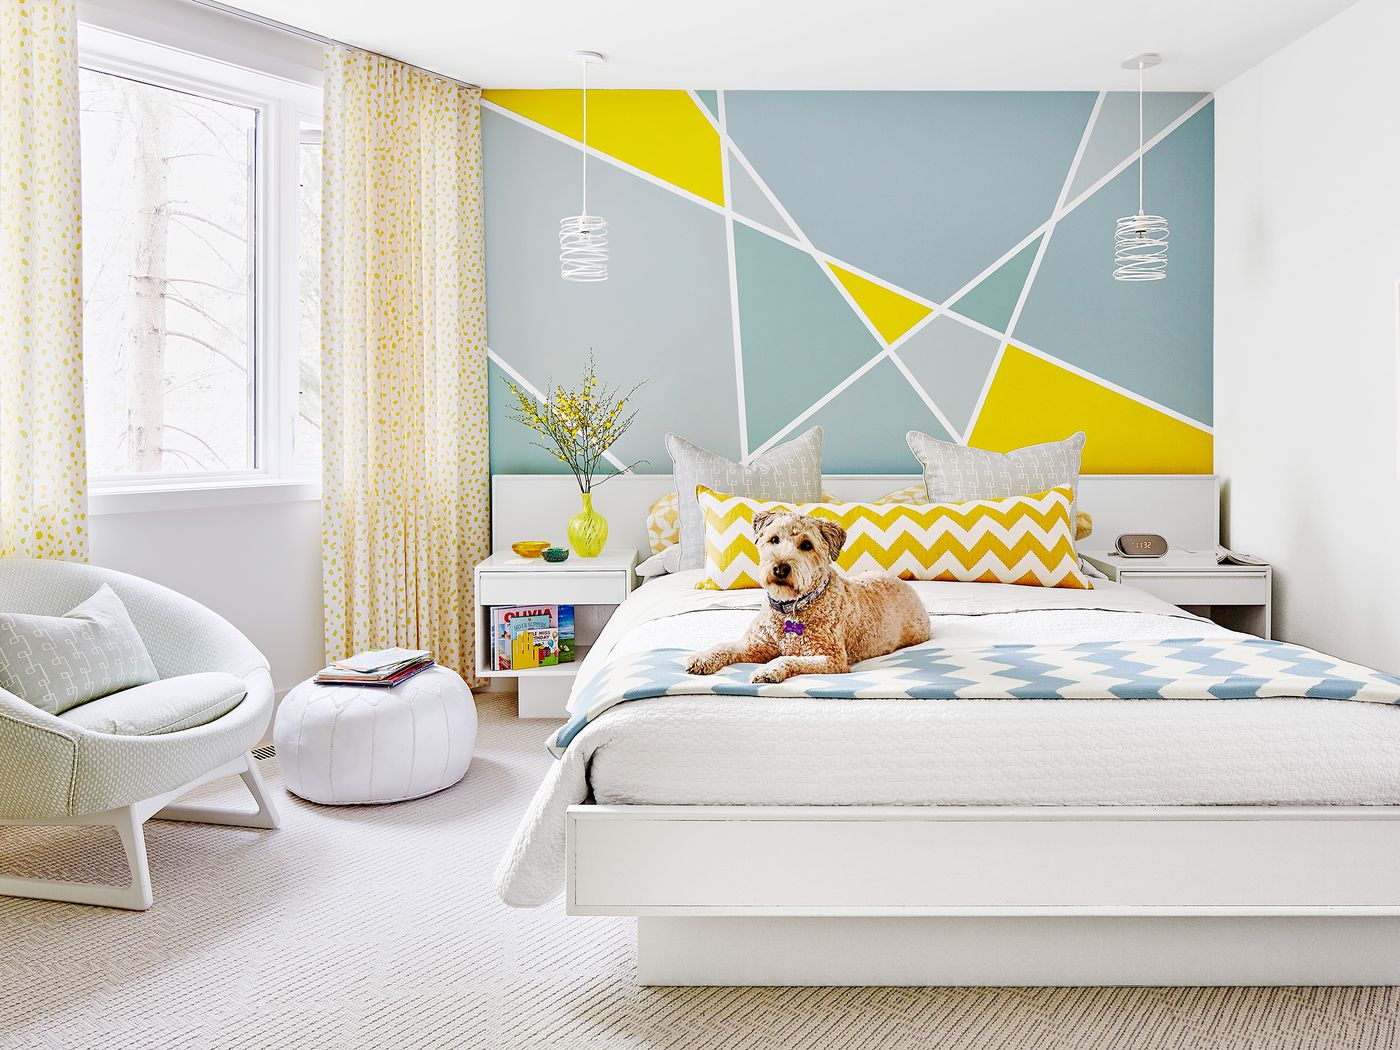 Paint a Simple Geometric Pattern on Your Bedroom Wall - This Old House